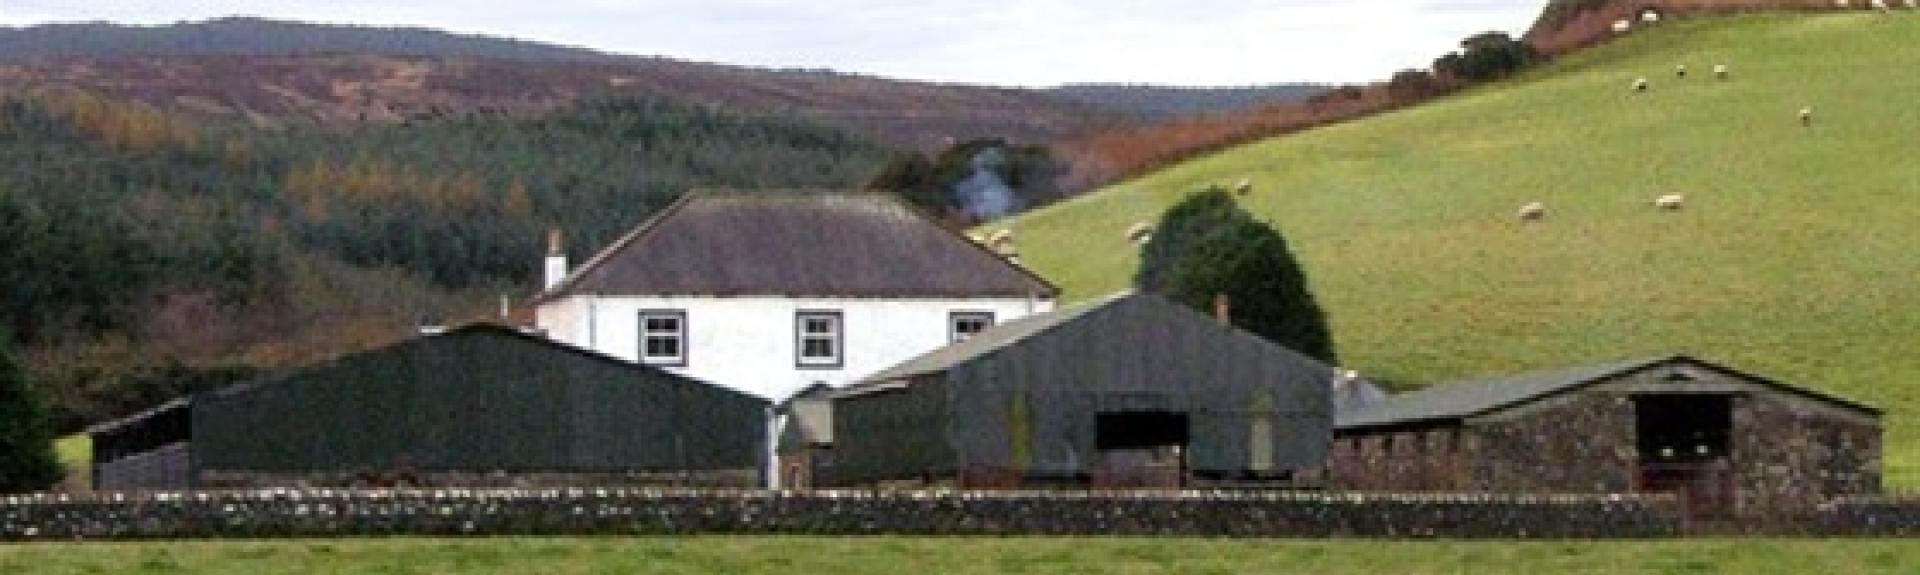 A Northumberland farmhouse in open countryside overlooks a row of traditional barns